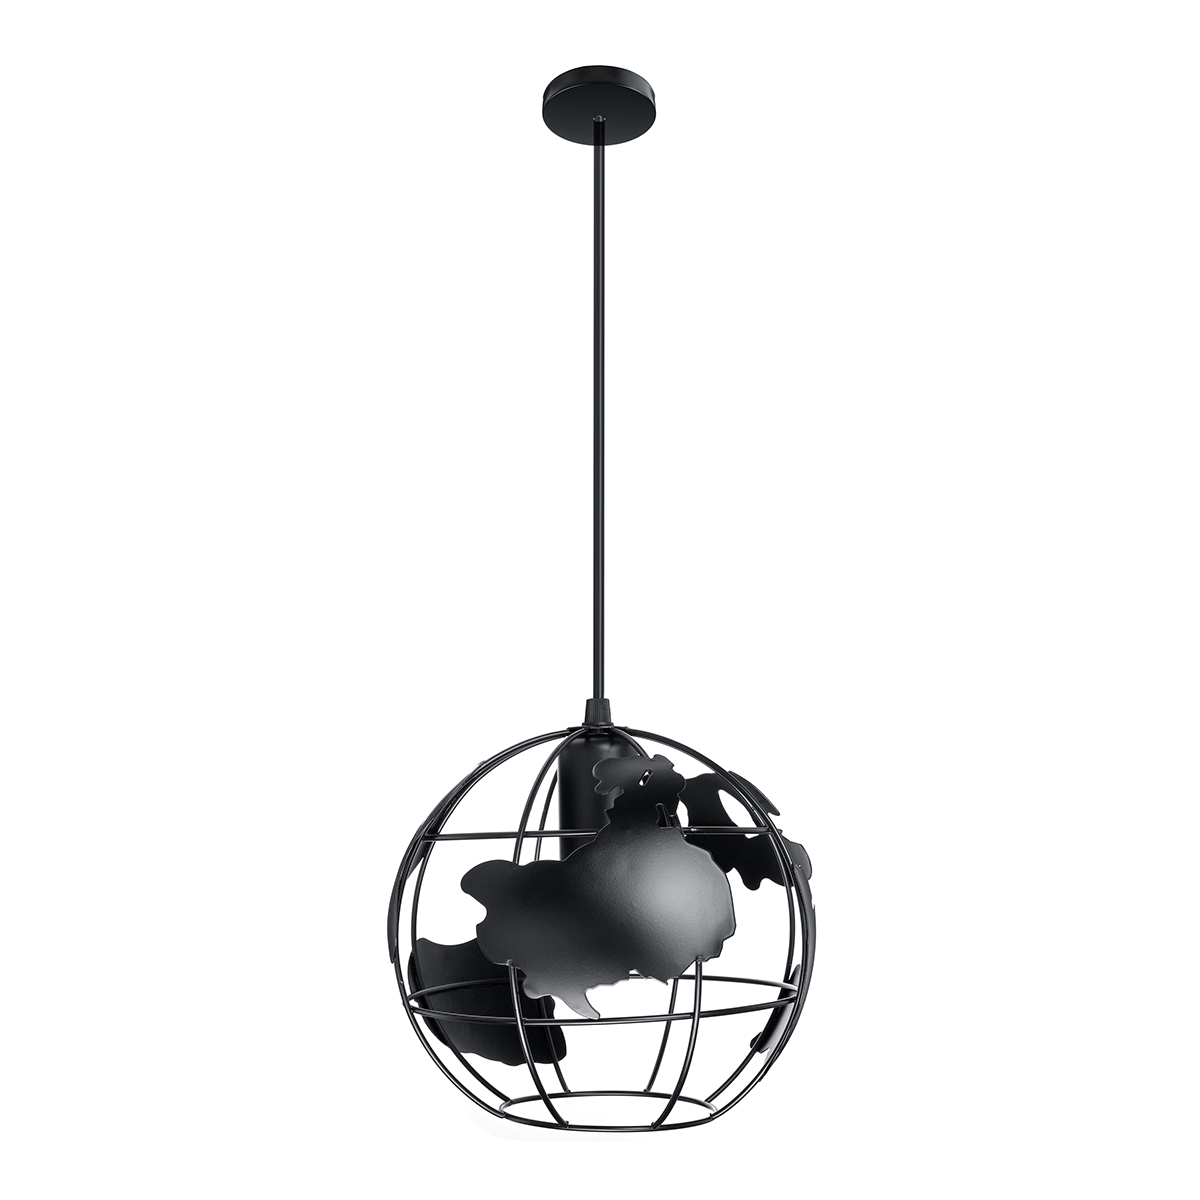 20X20CM-Retro-Iron-E27-Chandeliers-Industrial-Pendant-Light-Ceiling-Hanging-Lamp-for-Living-Dining-R-1723676-4